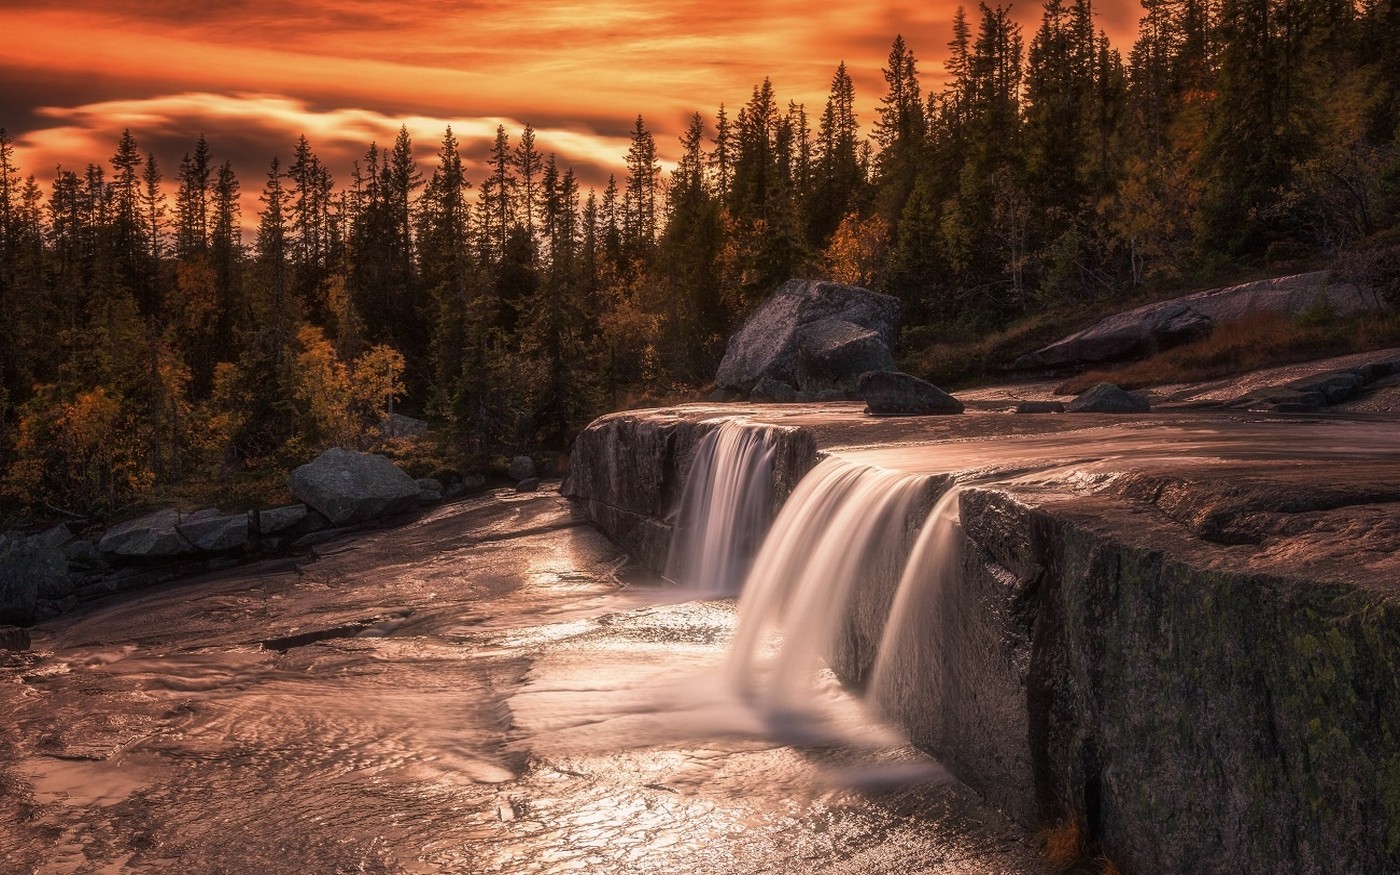 General 1400x875 nature landscape waterfall forest sunset long exposure trees sky clouds stones